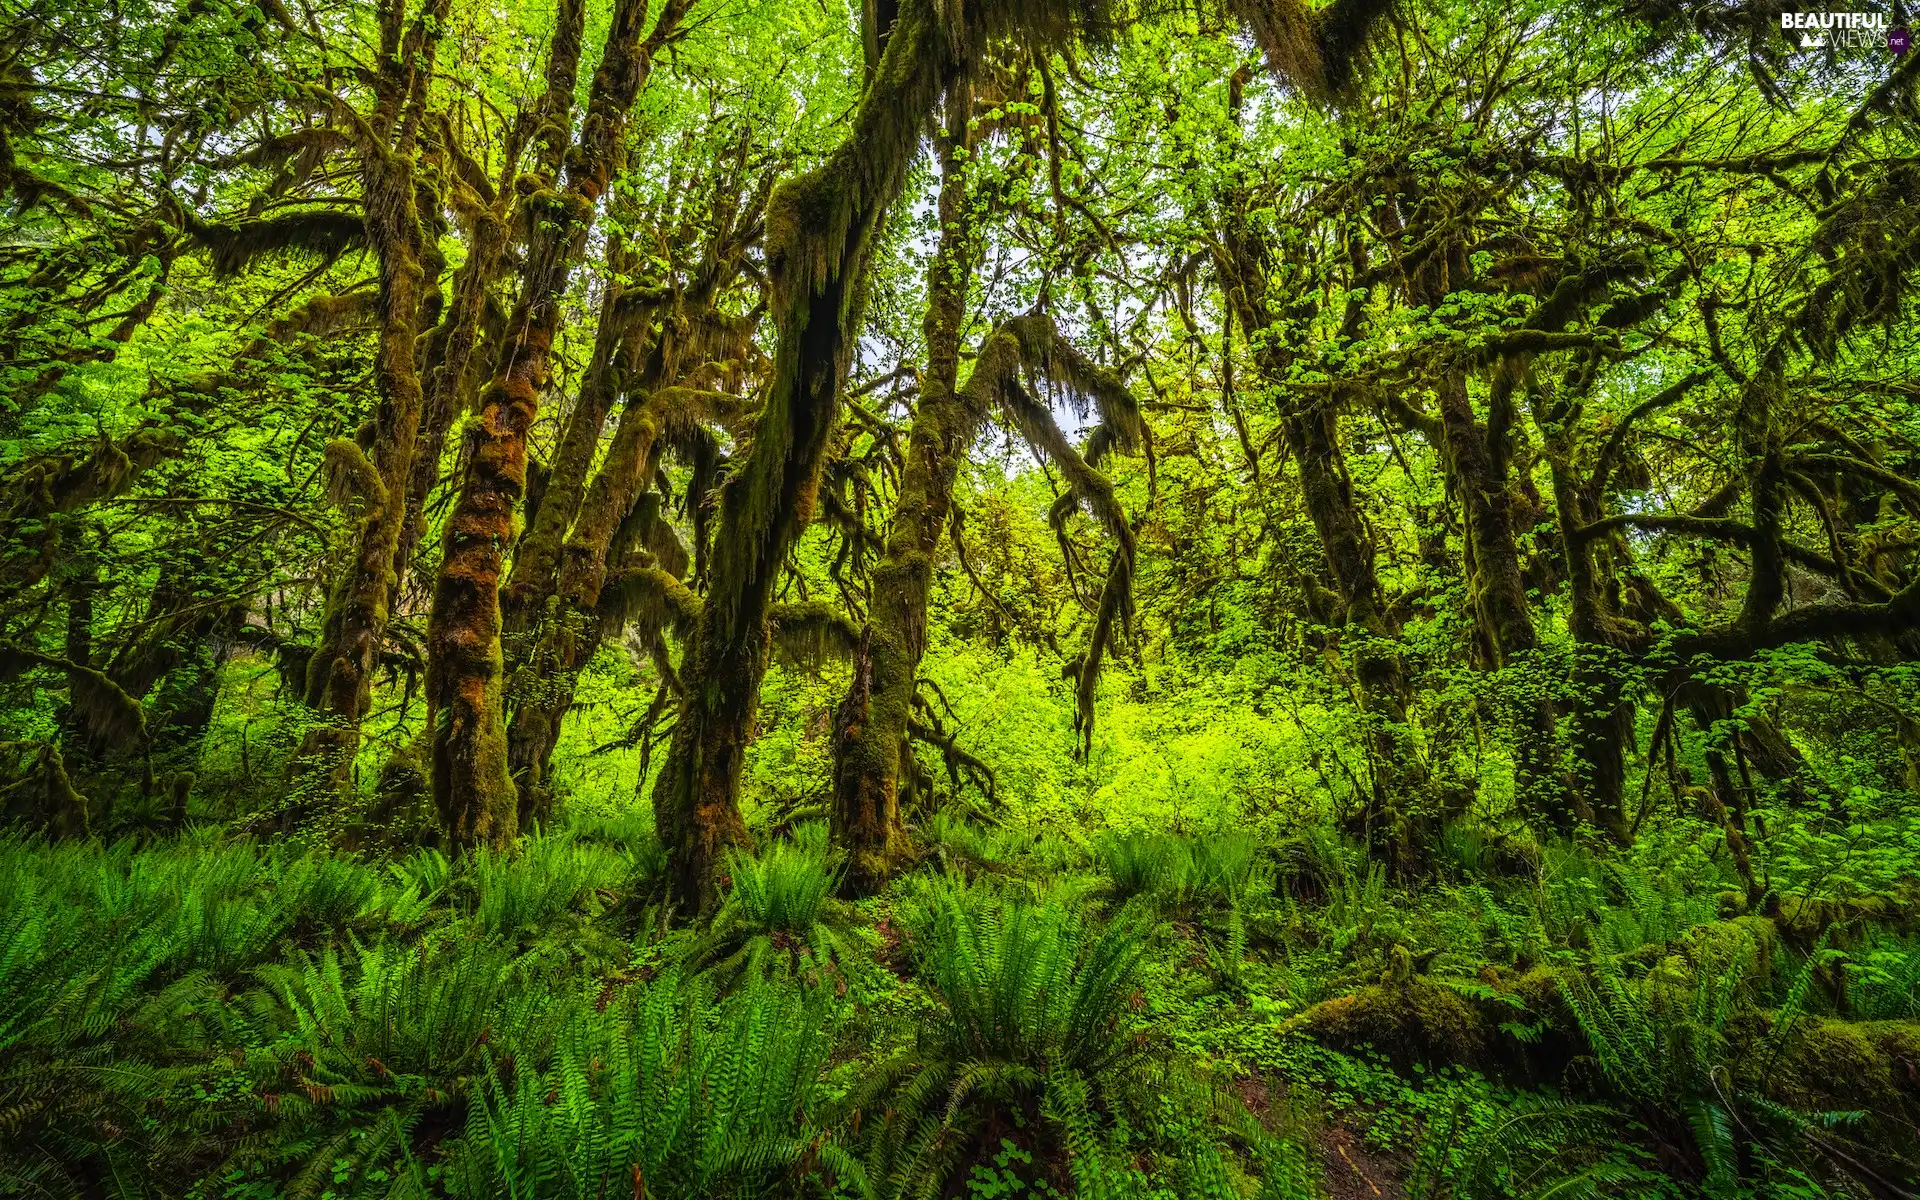 Washington State, The United States, Olympic National Park, Rainforest, fern, Climbers, viewes, mossy, trees